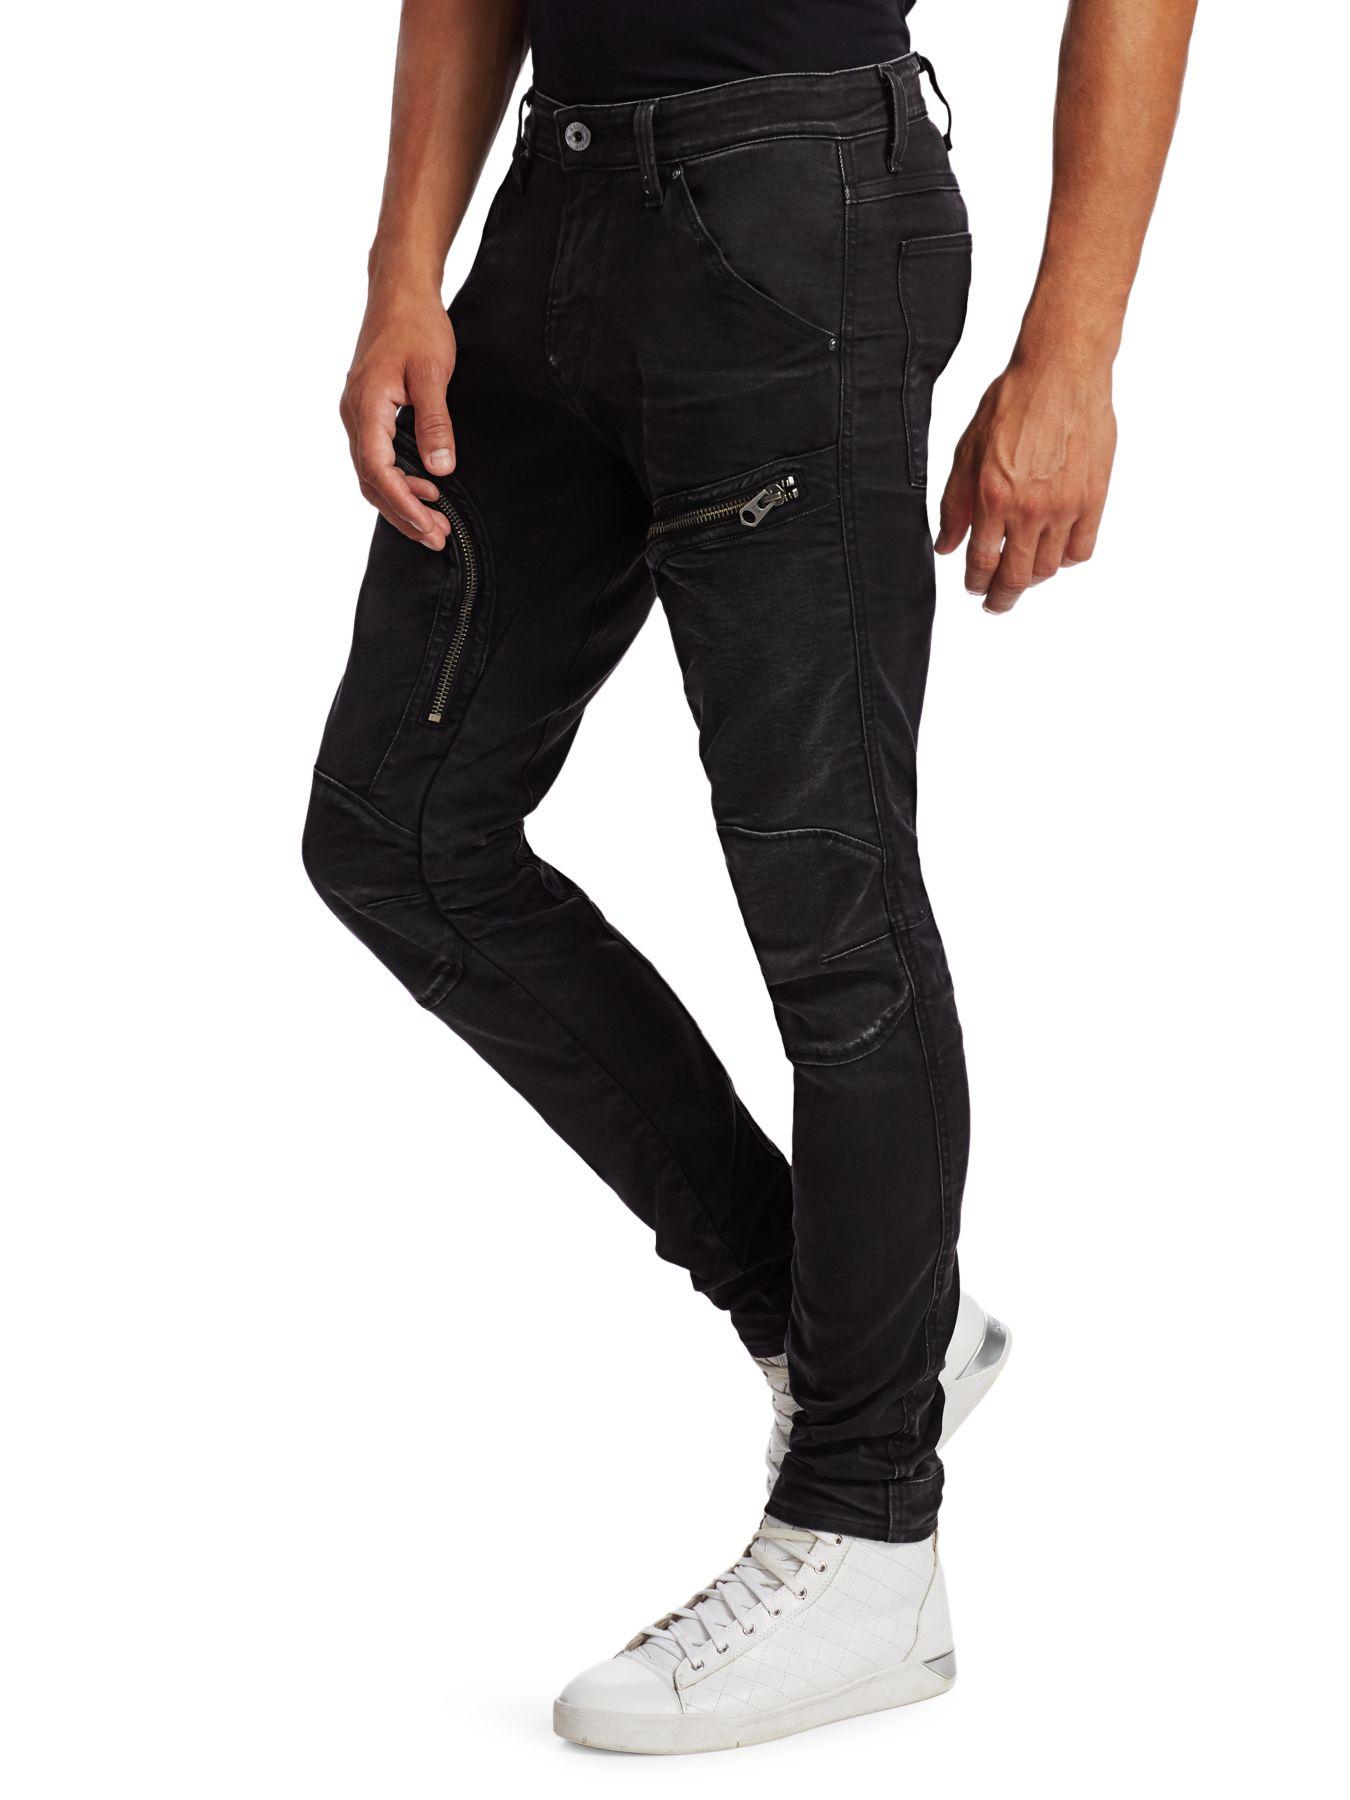 G-Star RAW Air Defence Zip Skinny Jeans in Black for Men | Lyst